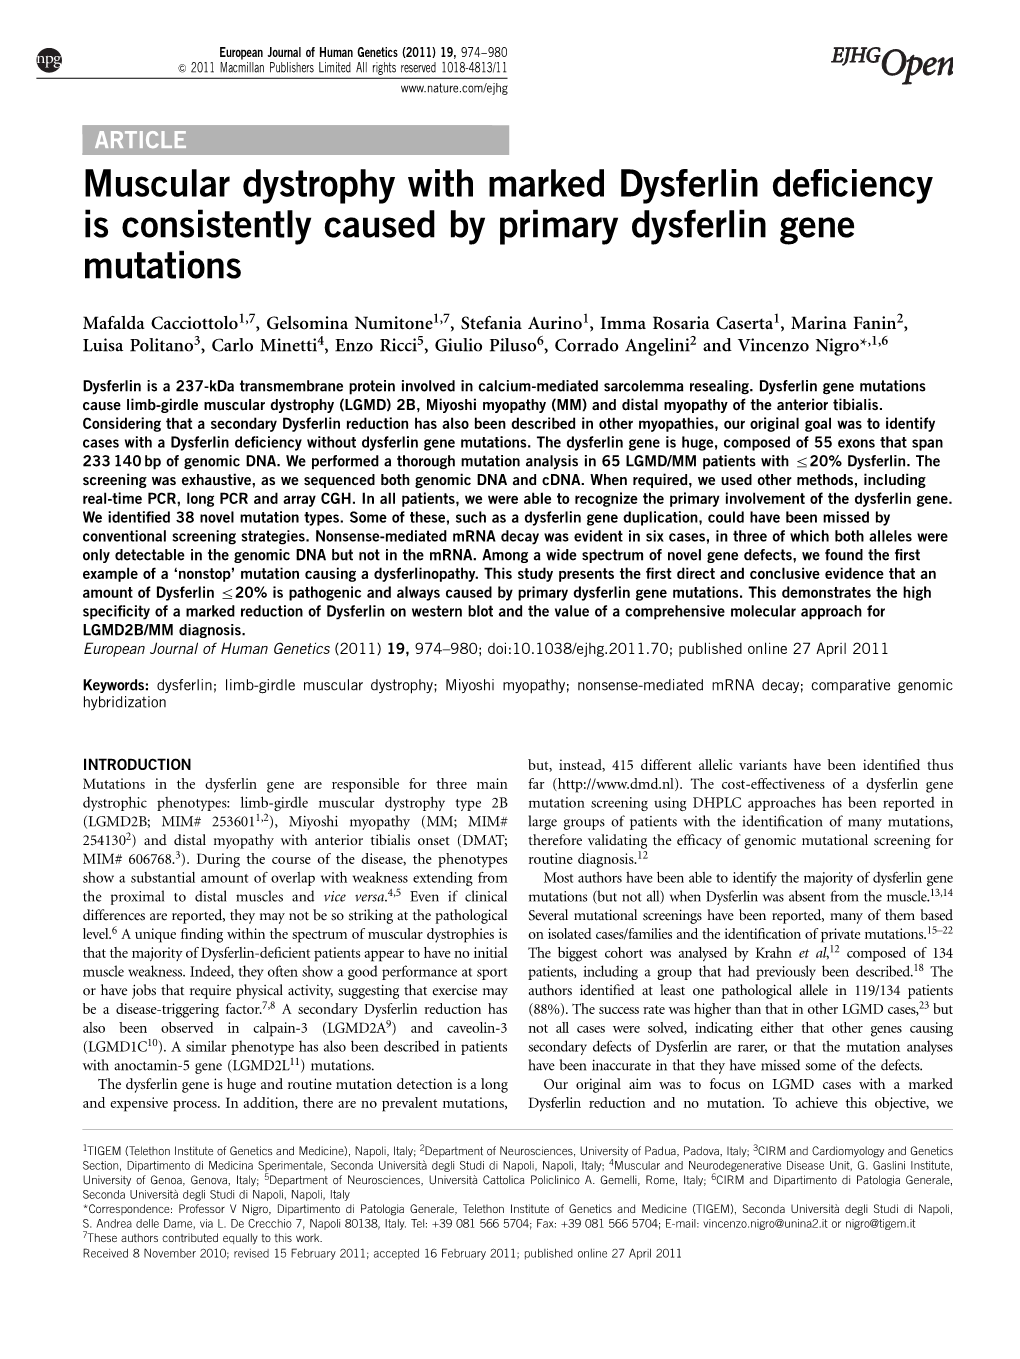 Muscular Dystrophy with Marked Dysferlin Deficiency Is Consistently Caused by Primary Dysferlin Gene Mutations